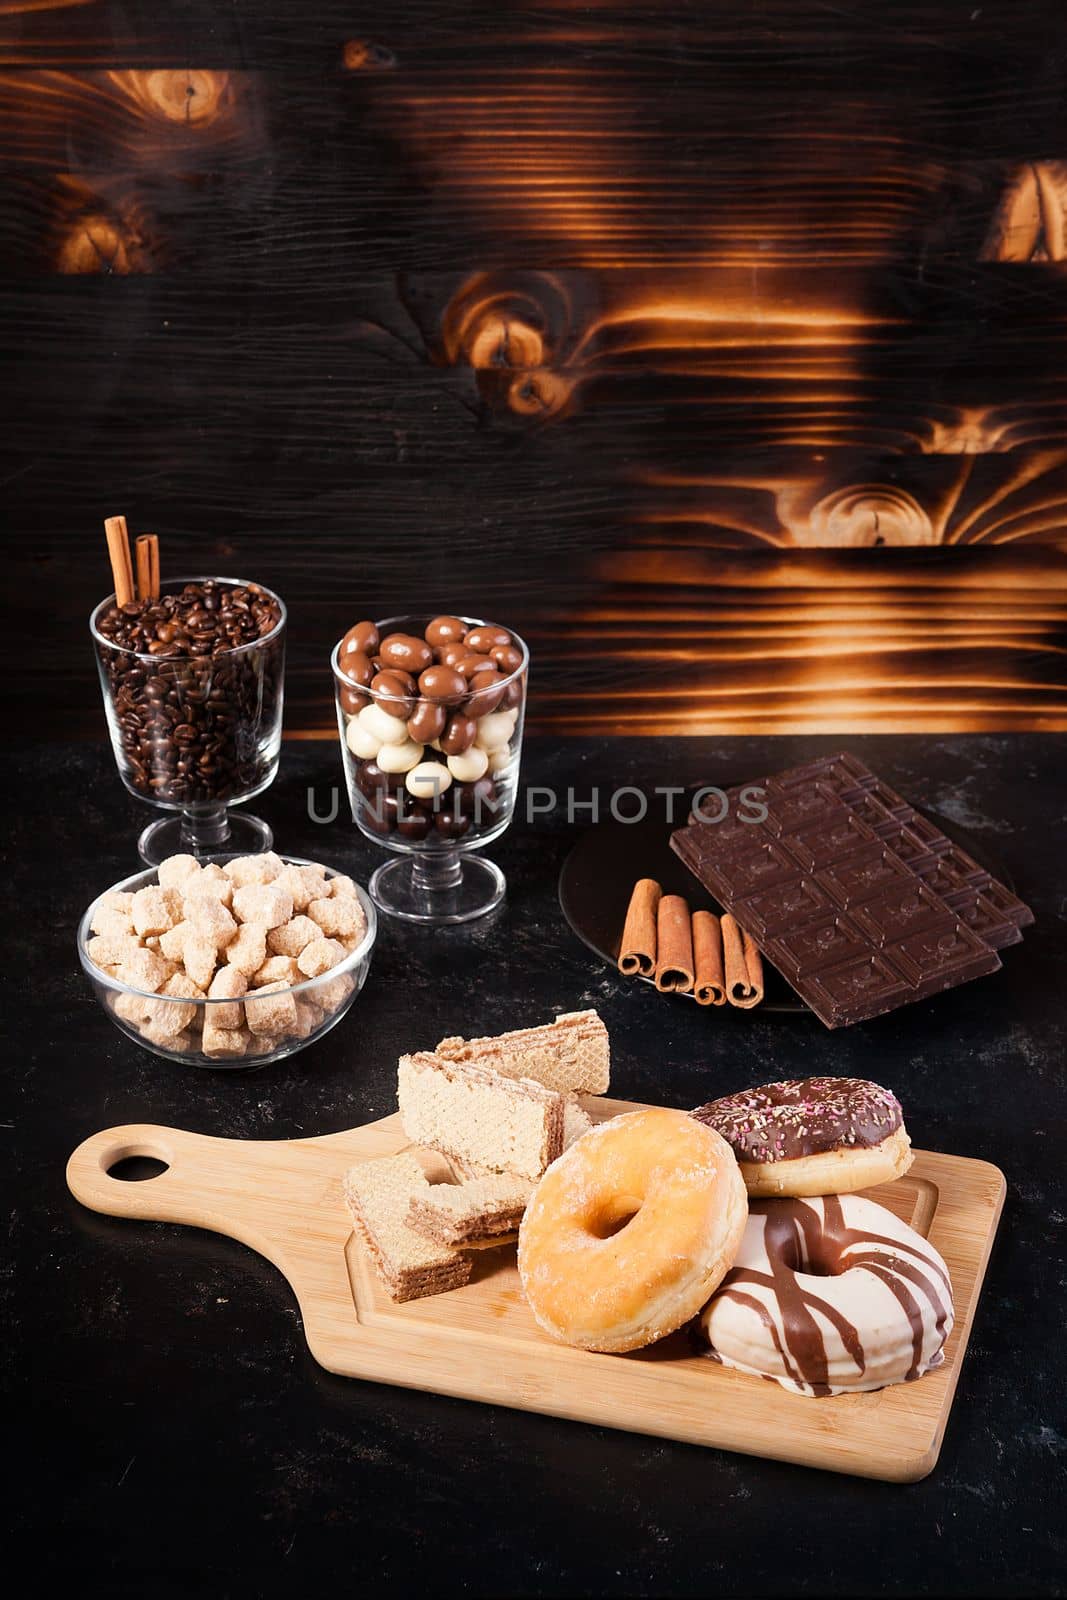 Unhealthy but delicous sweets and pastry by DCStudio